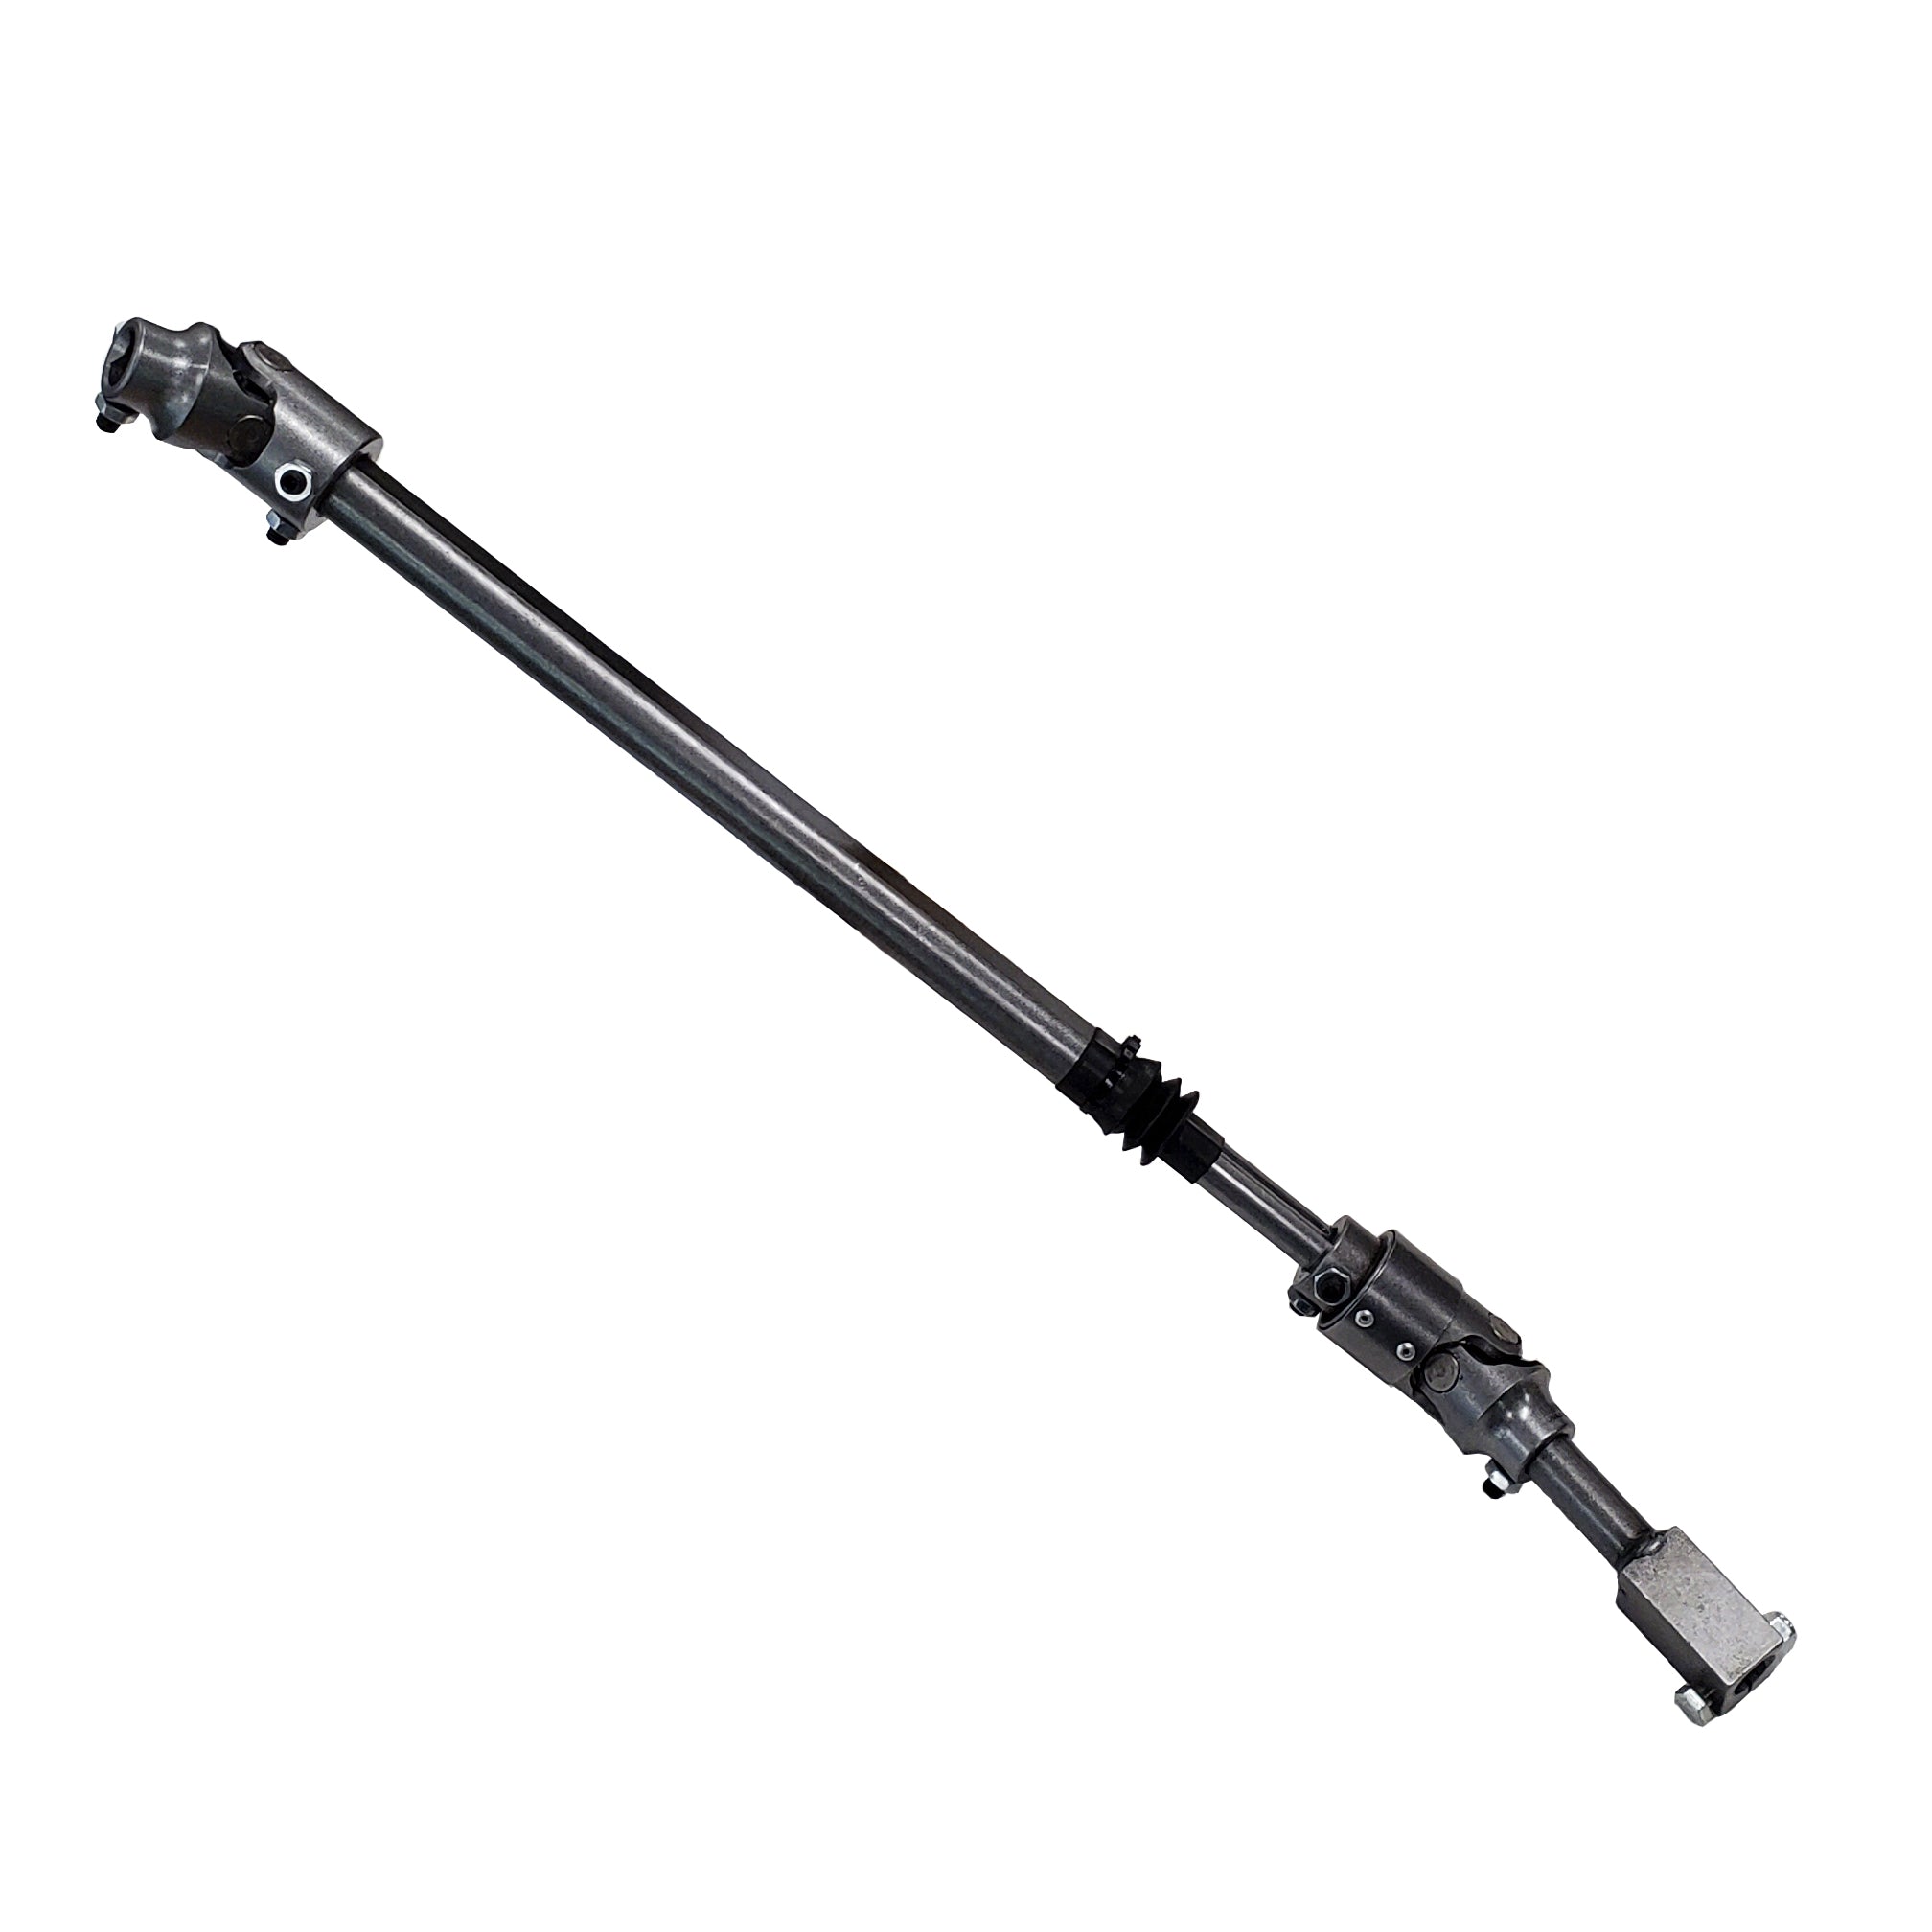 Borgeson Steering Shaft Heavy Duty Telescopic Steel 2014-2019 Ram 1500 2WD and 4WD. 000953